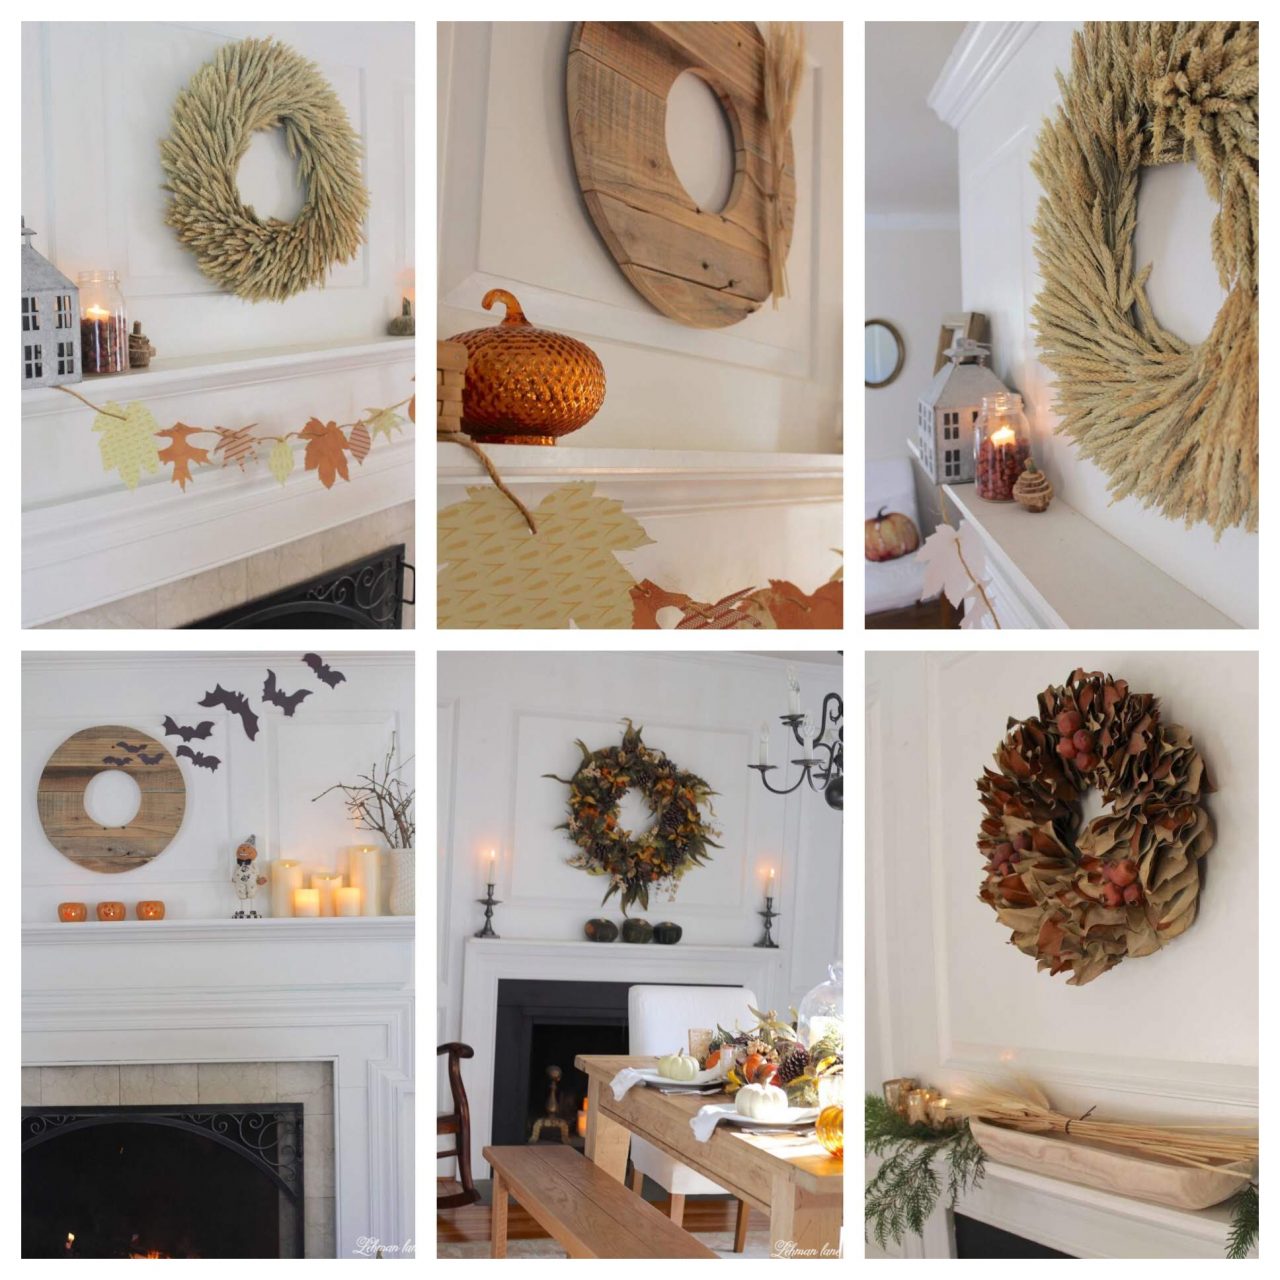 7 Fall Mantel Decor Ideas from our Farmhouse - I am sharing our fall fireplace along with a 6 of my favorite fall mantel decor ideas from the past! #fall 3fallfarmhouse #fallmantel https://lehmanlane.net